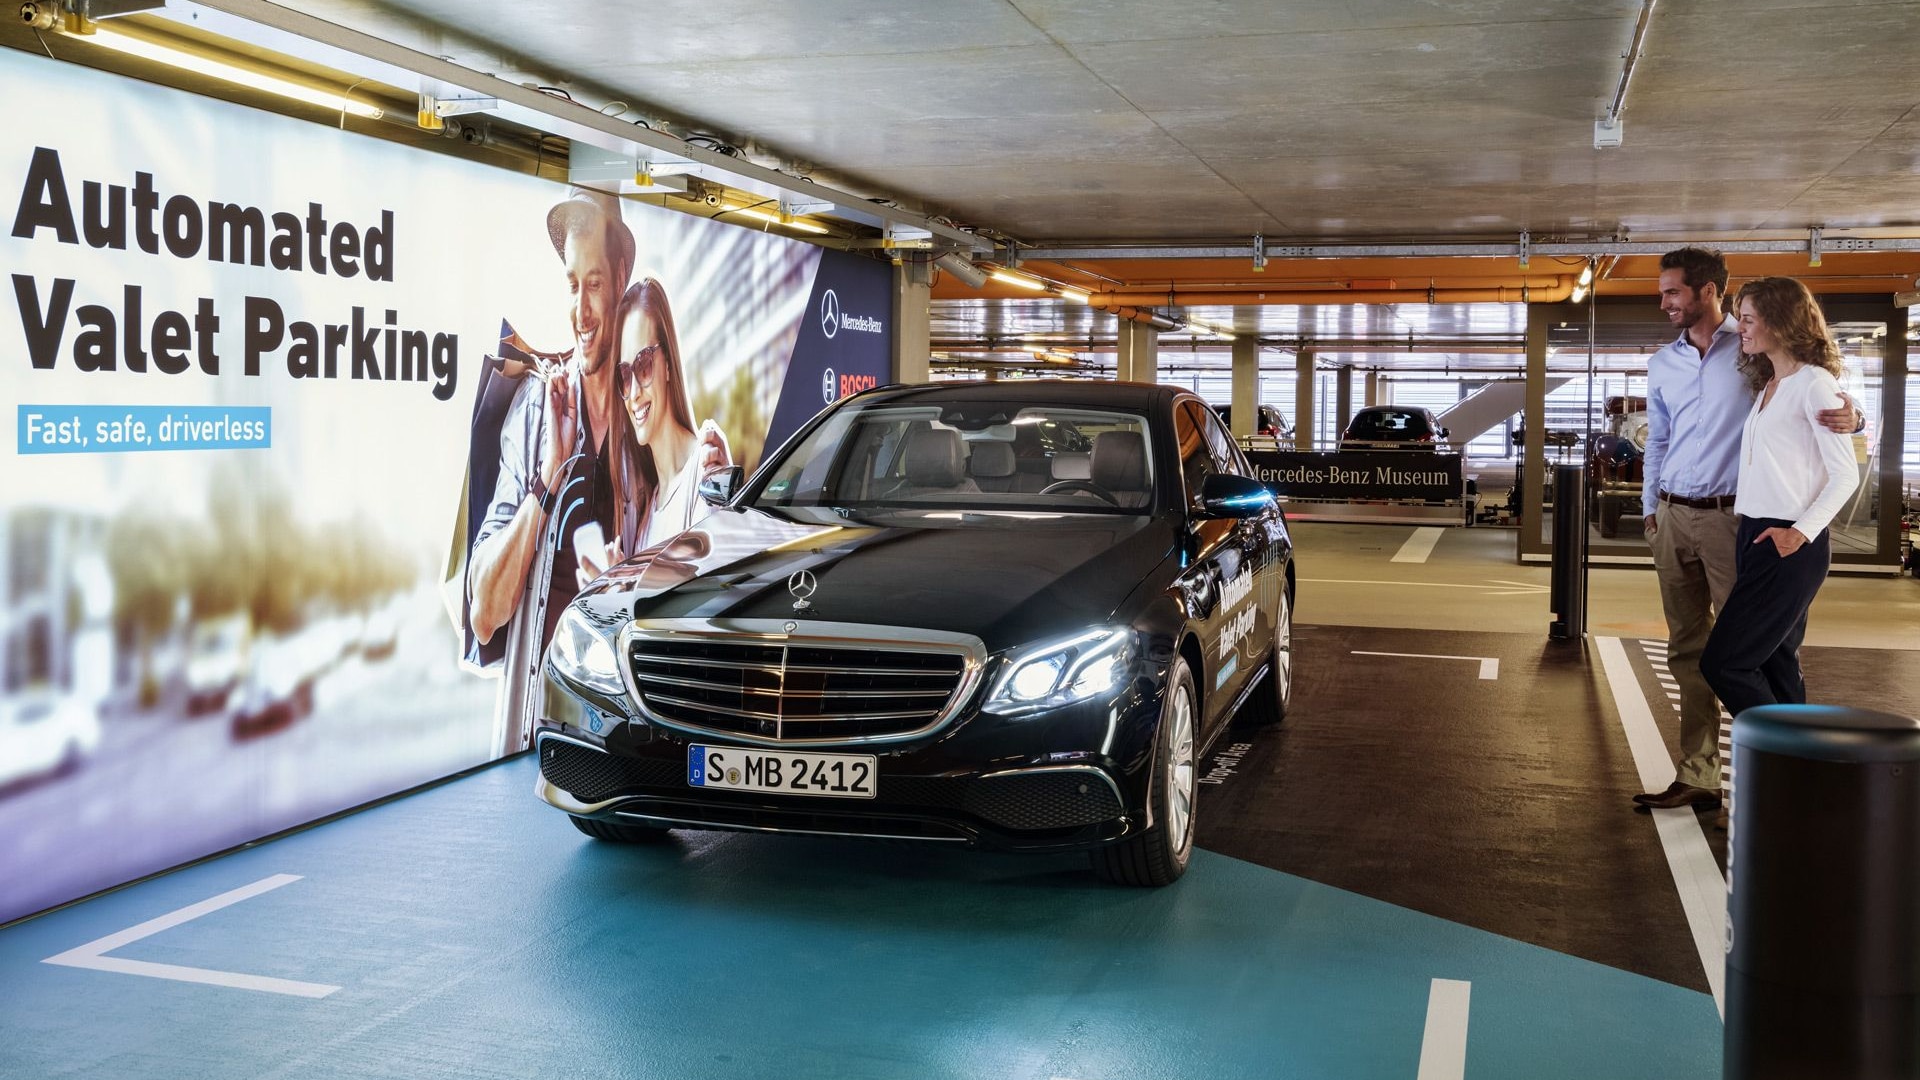 Mercedes-Benz and Bosch Automated Valet Parking